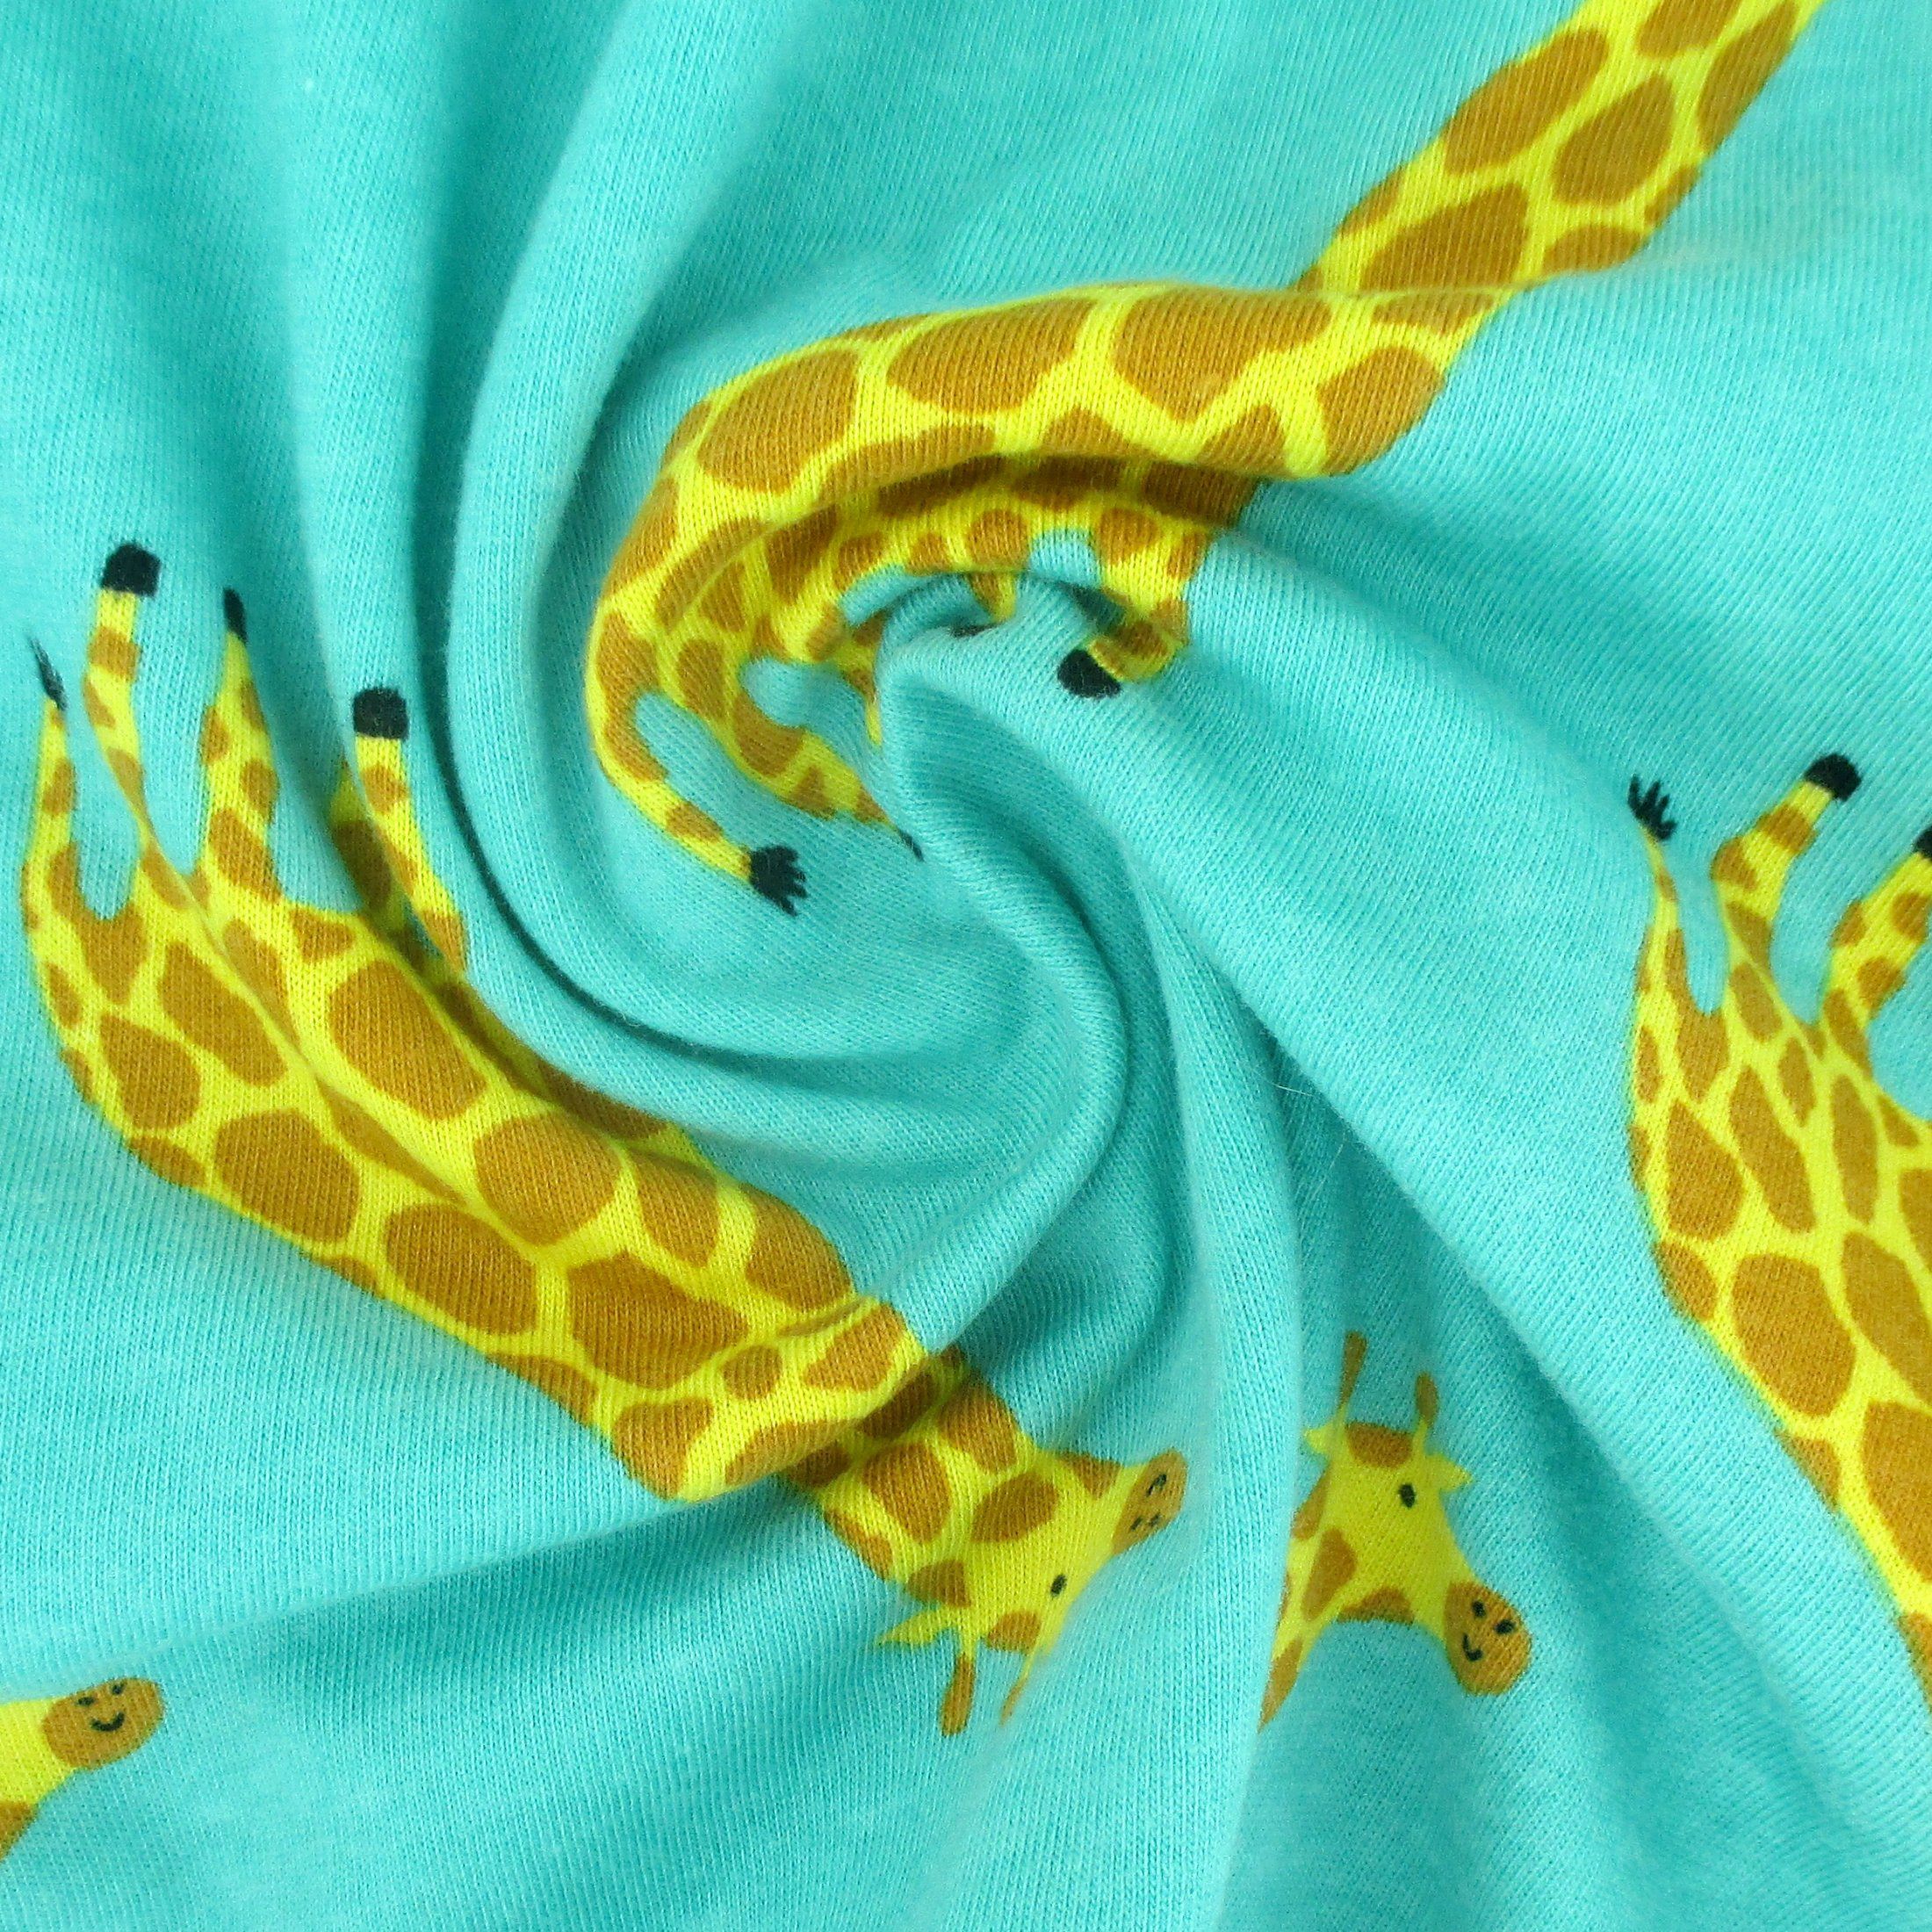 Giraffe Patterned Cotton Stretch Knit Boxer Shorts in Teal Blue Green